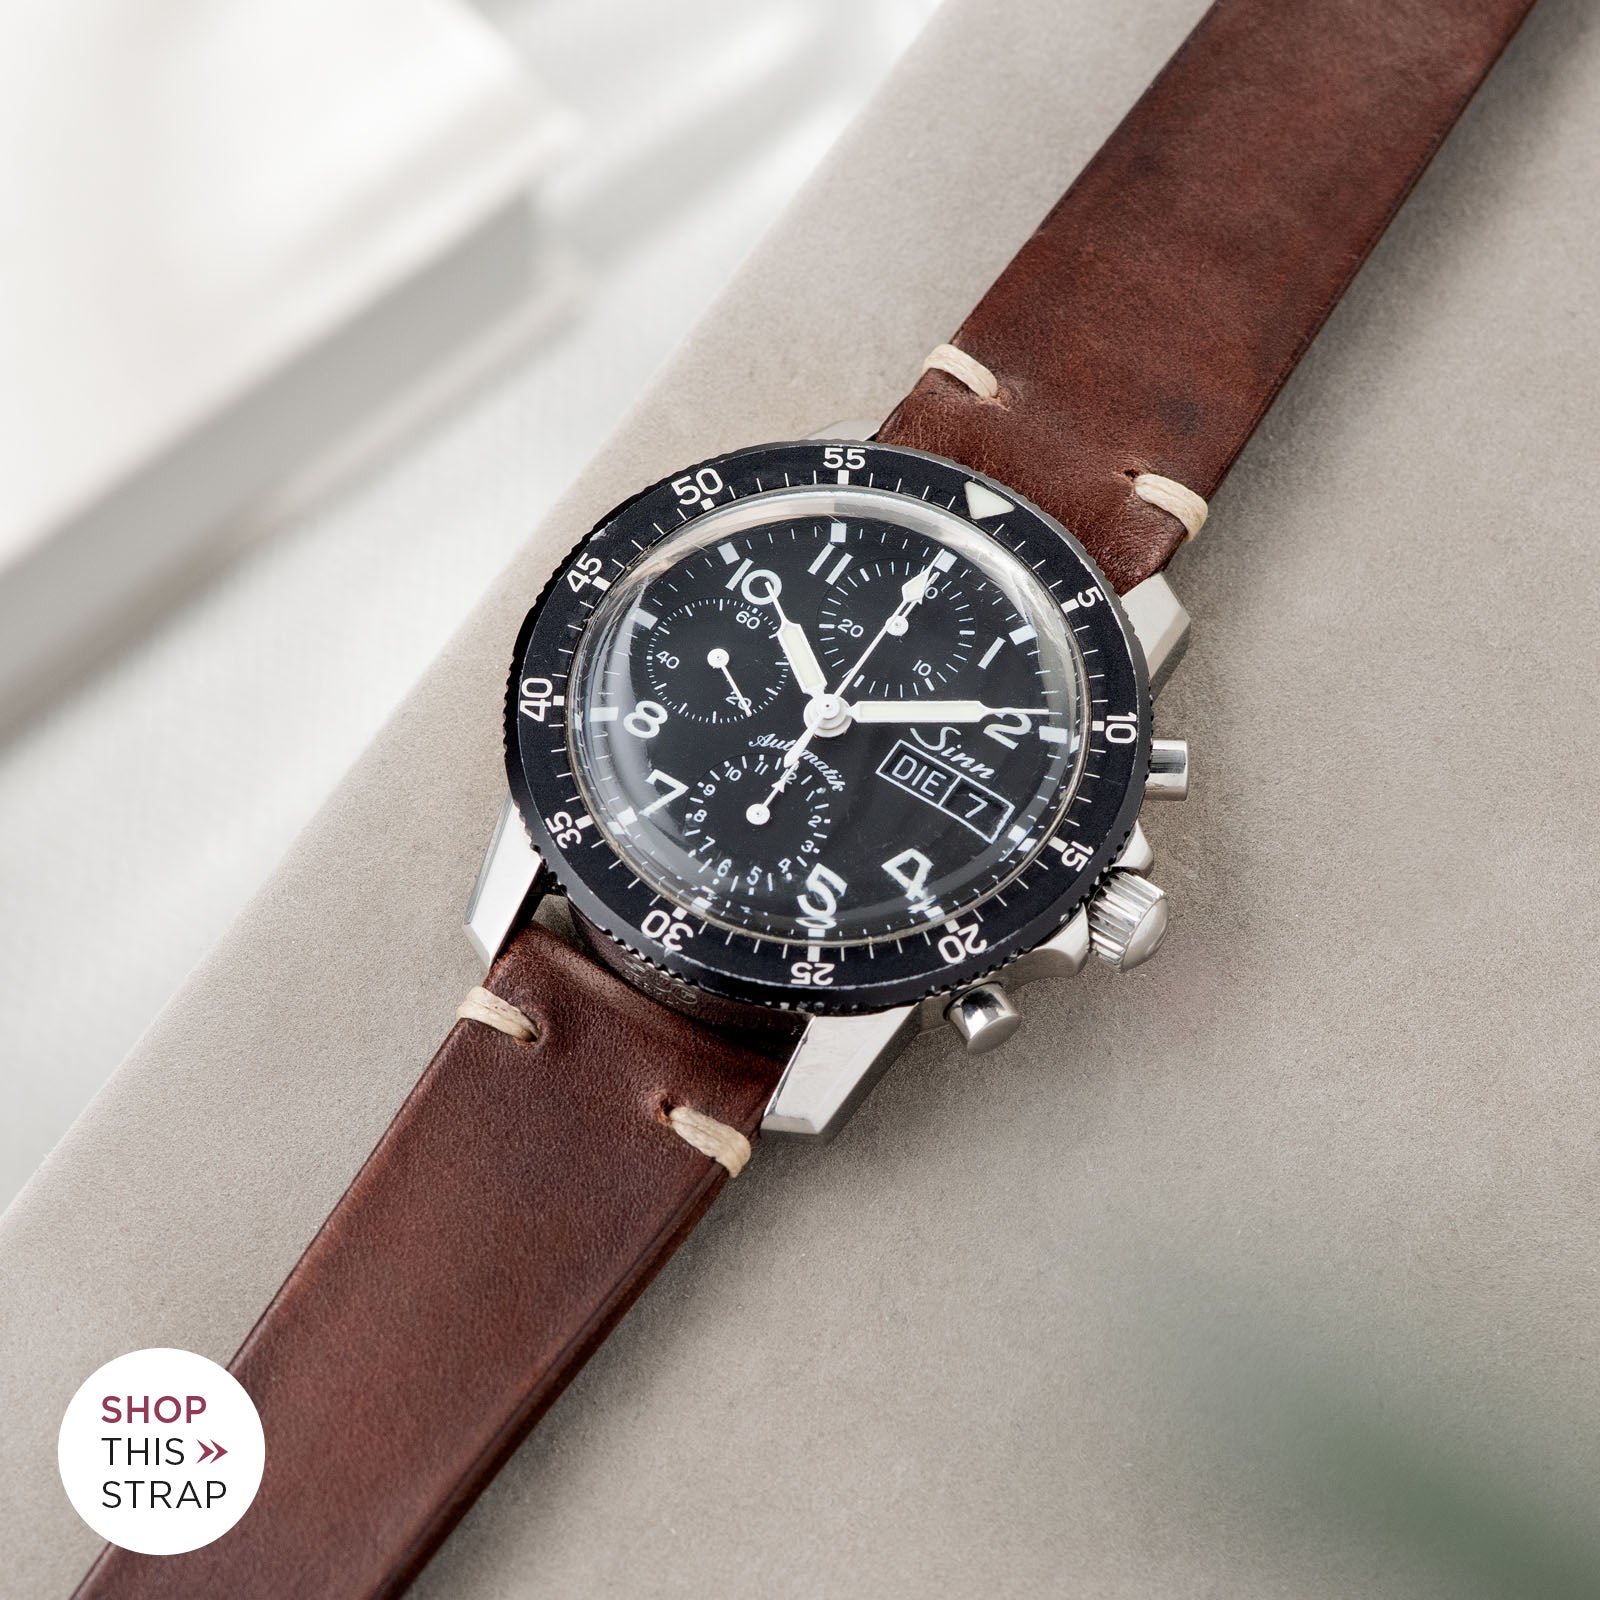 Bulang and Sons_Strap Guide_Sinn 103St Flieder Chronograph_Lumberjack Brown Leather Watch Strap